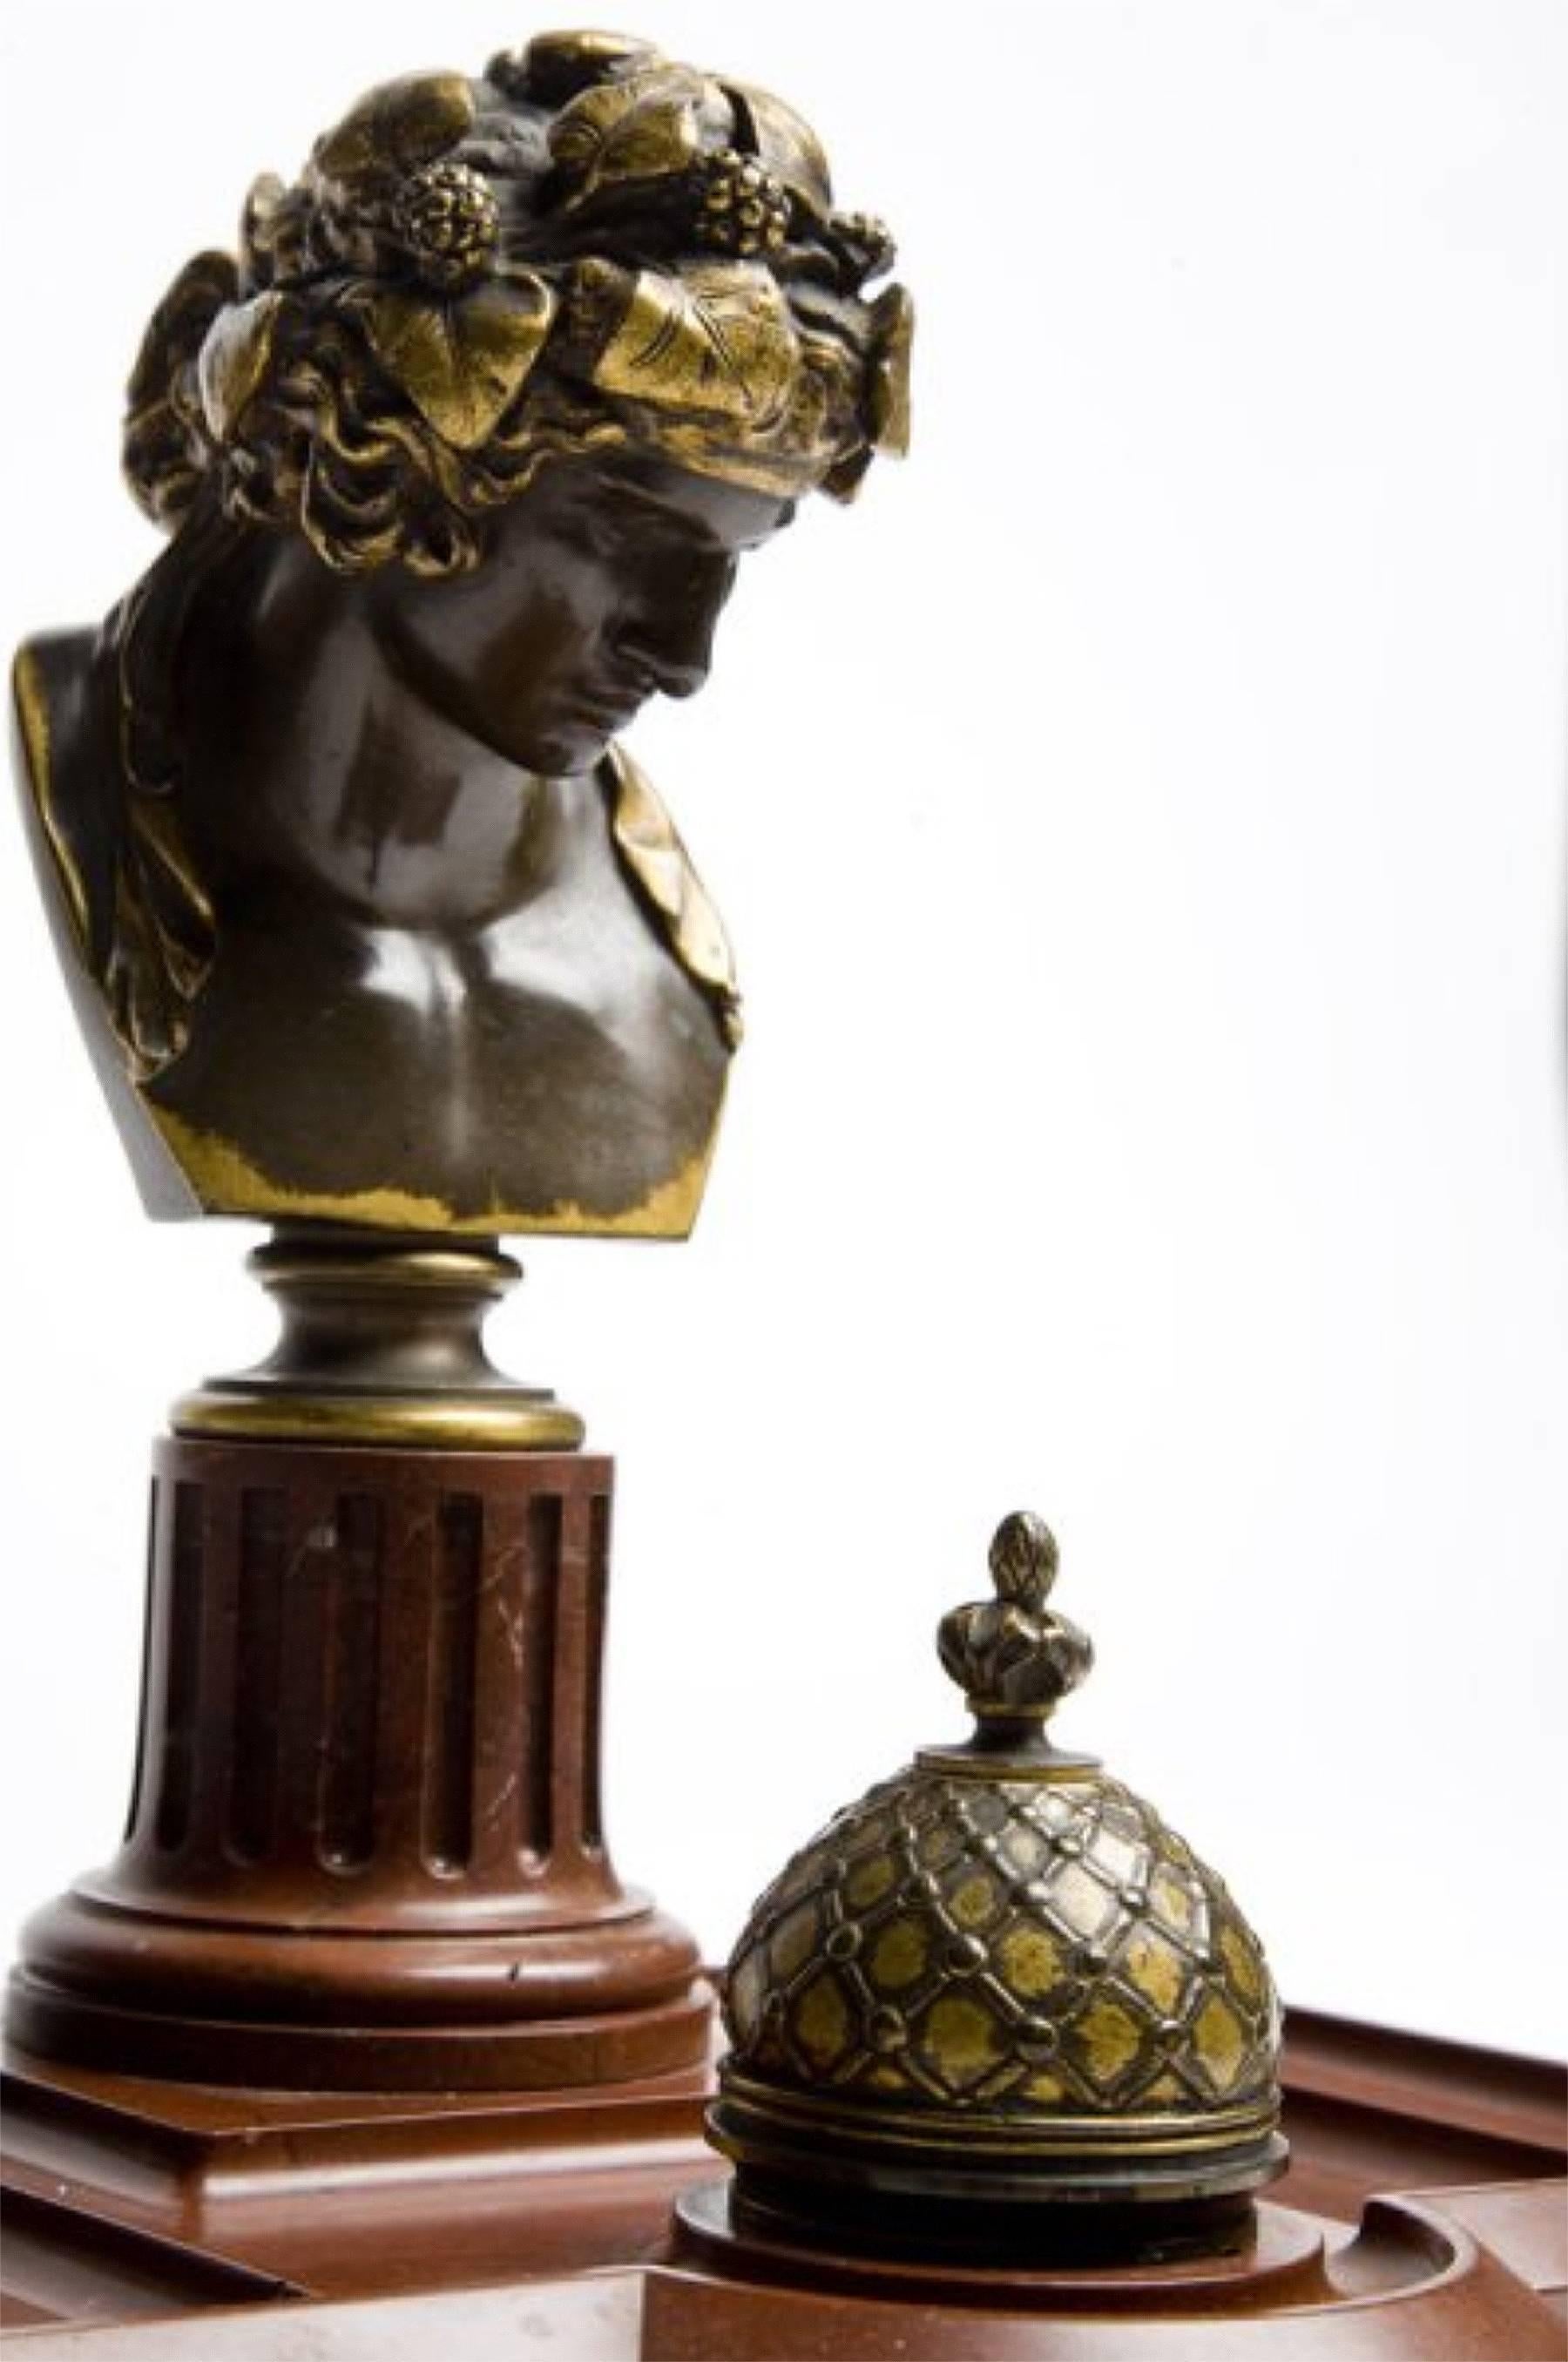 A Verona red marble remarkable inkwell pure Empire style representing a gilded bronze of the bust of Antinous as Dioniso. Empire style, France. Signed by Ferdinand Barbedienne fondeur.
Generous size, excellent state of preservation.